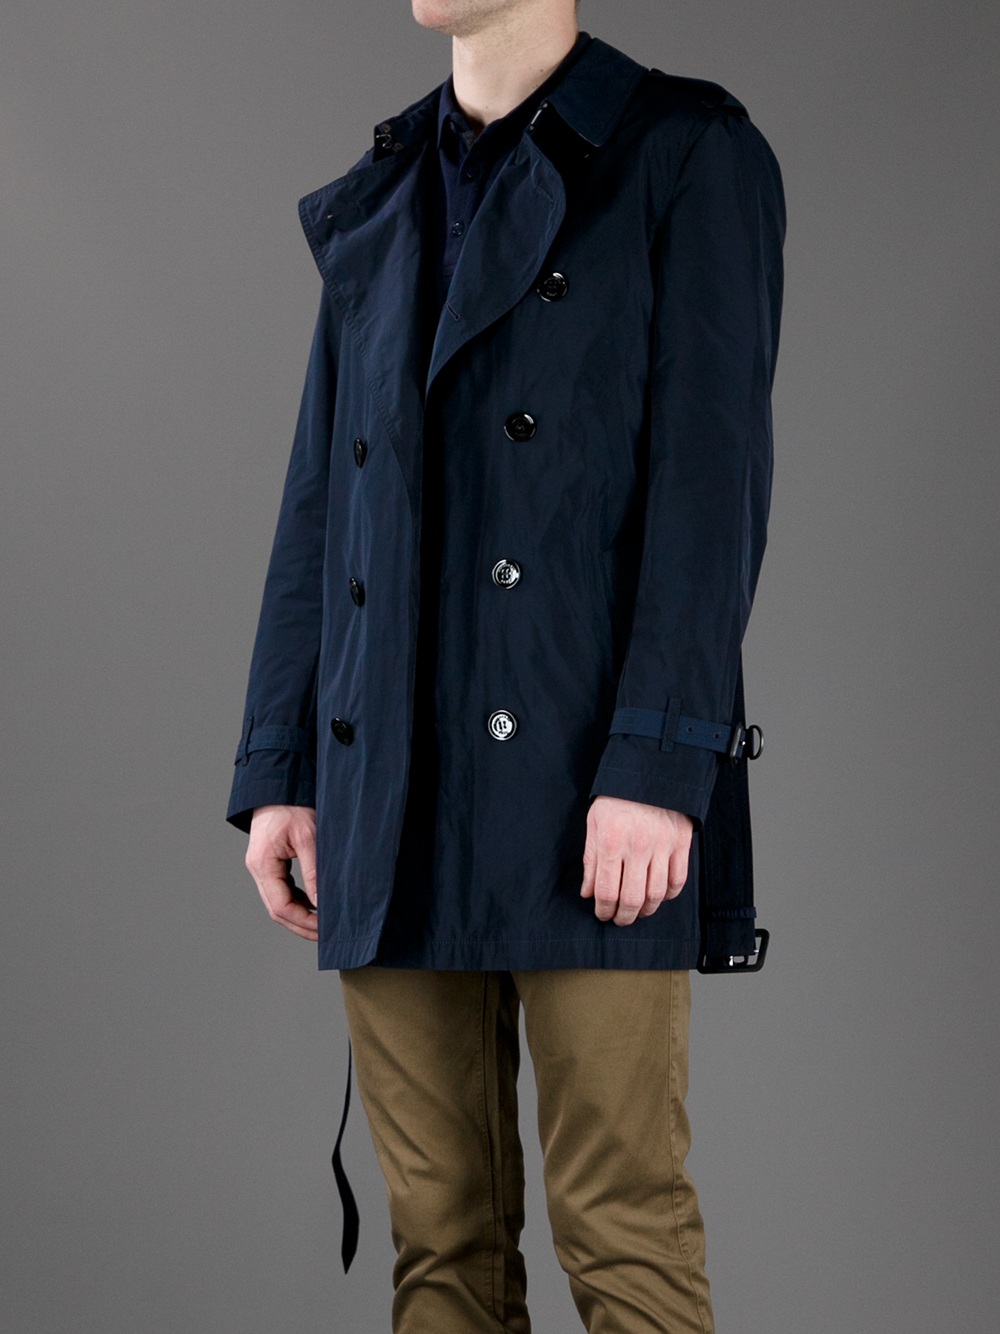 Lyst - Burberry brit Britton Trench Coat in Blue for Men